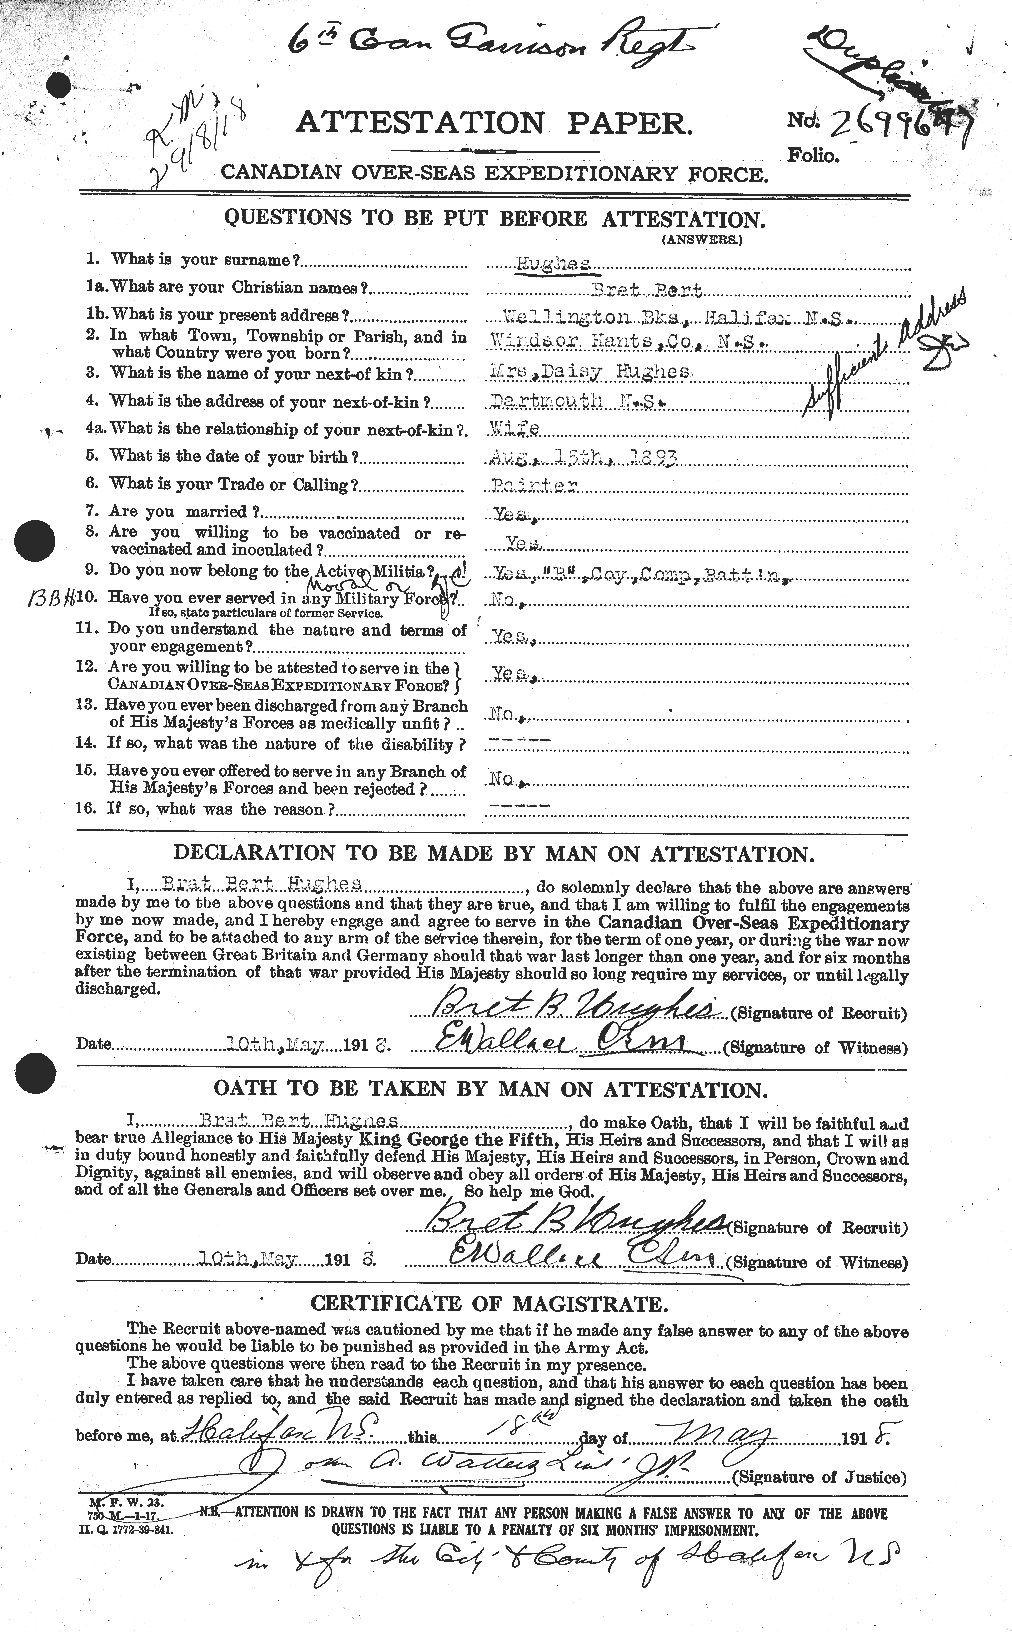 Personnel Records of the First World War - CEF 402590a